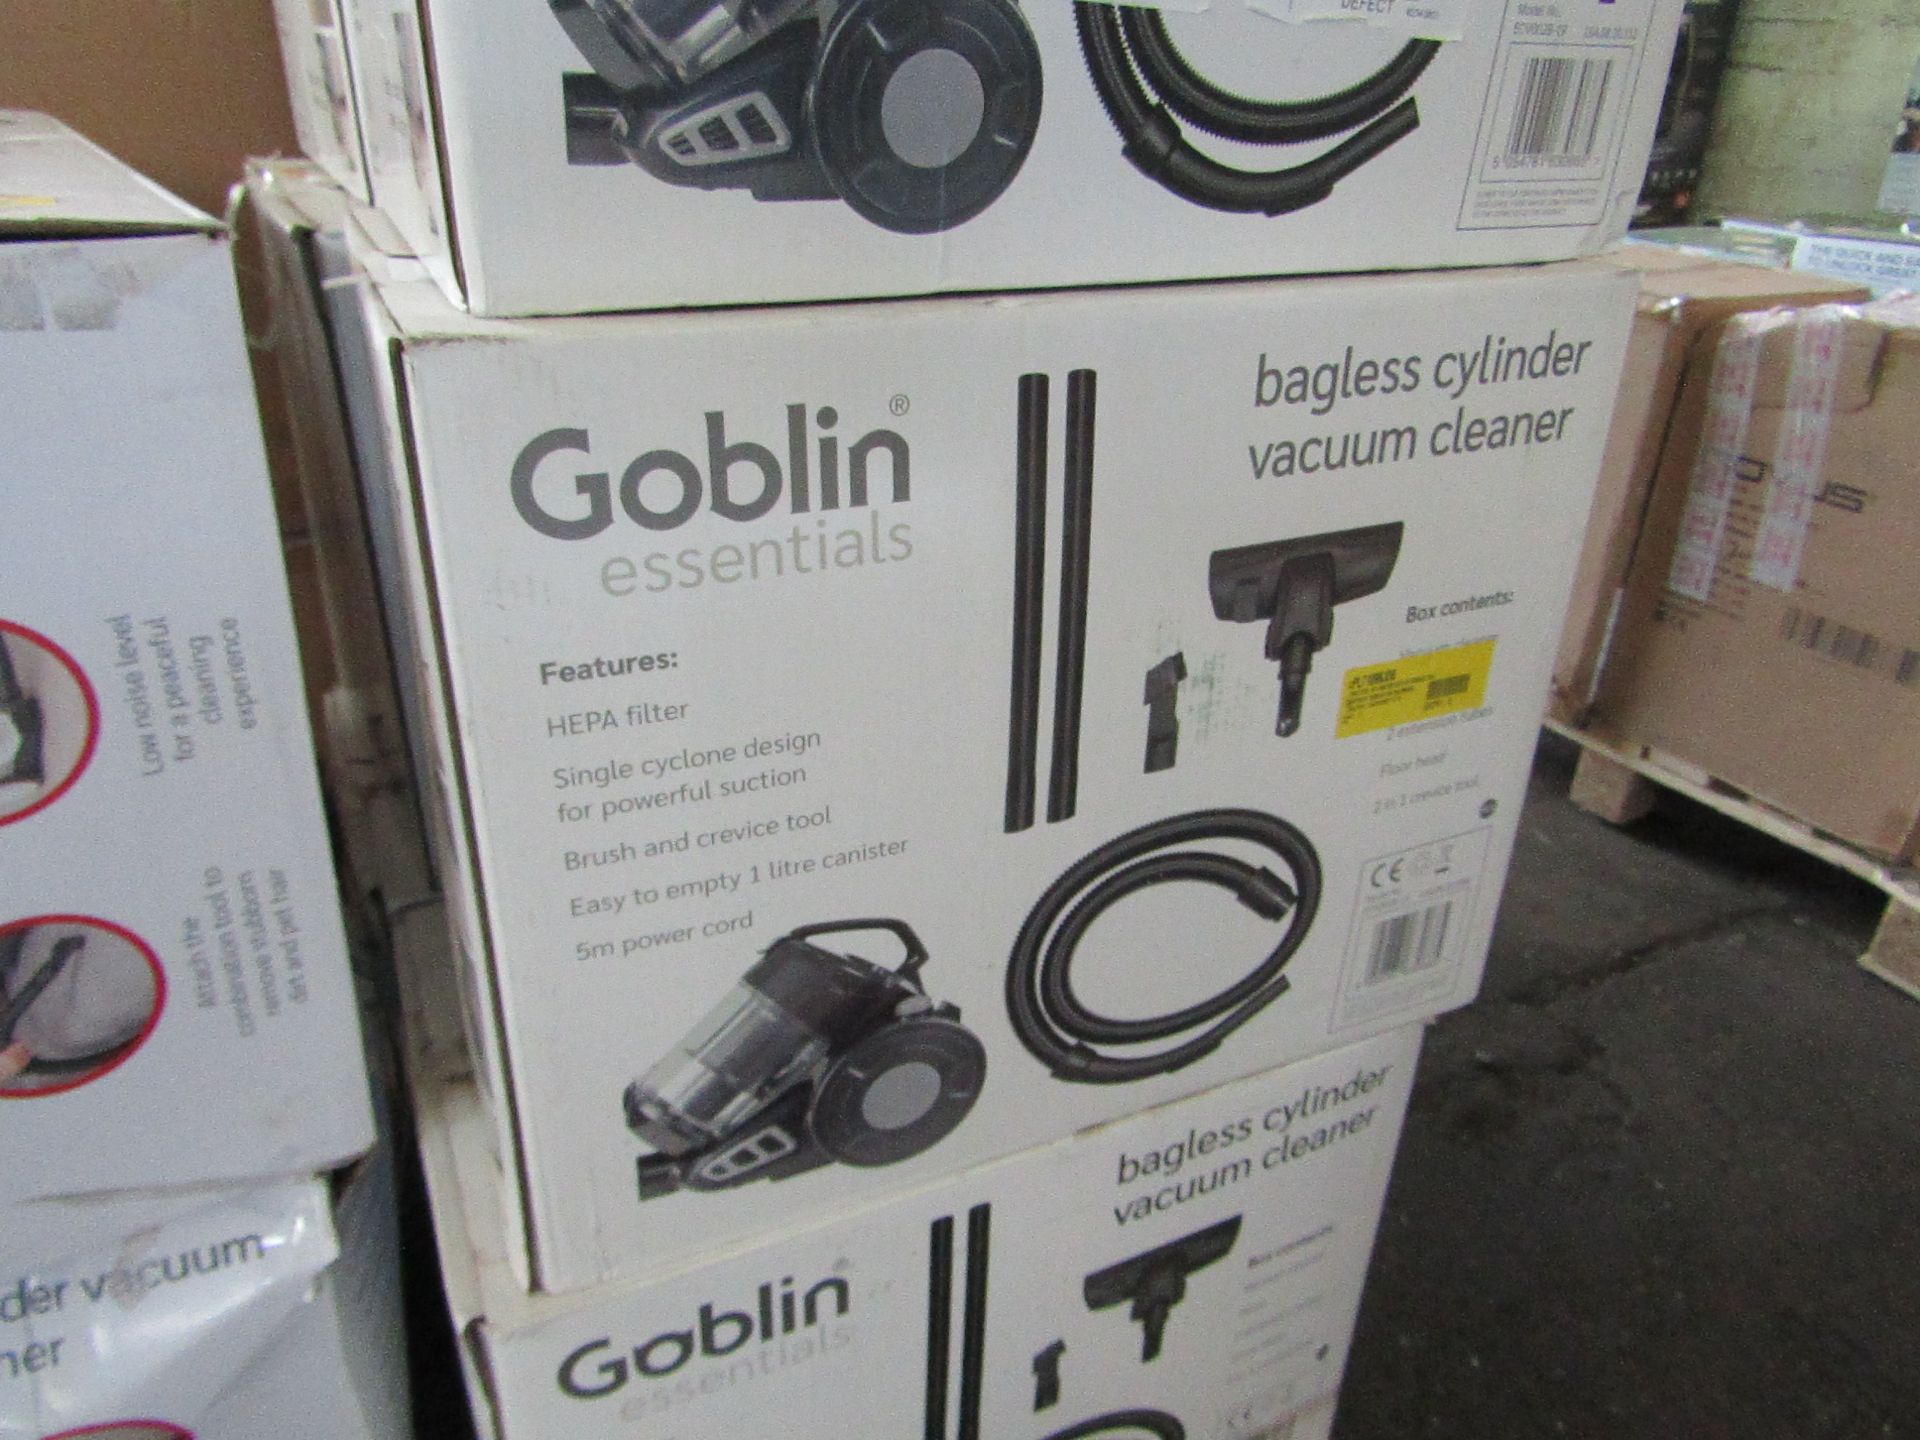 2x Goblin Essentials Bagless Vacuum Cleaners - Tested Working & Boxed - RRP £36 - Total RRP £72